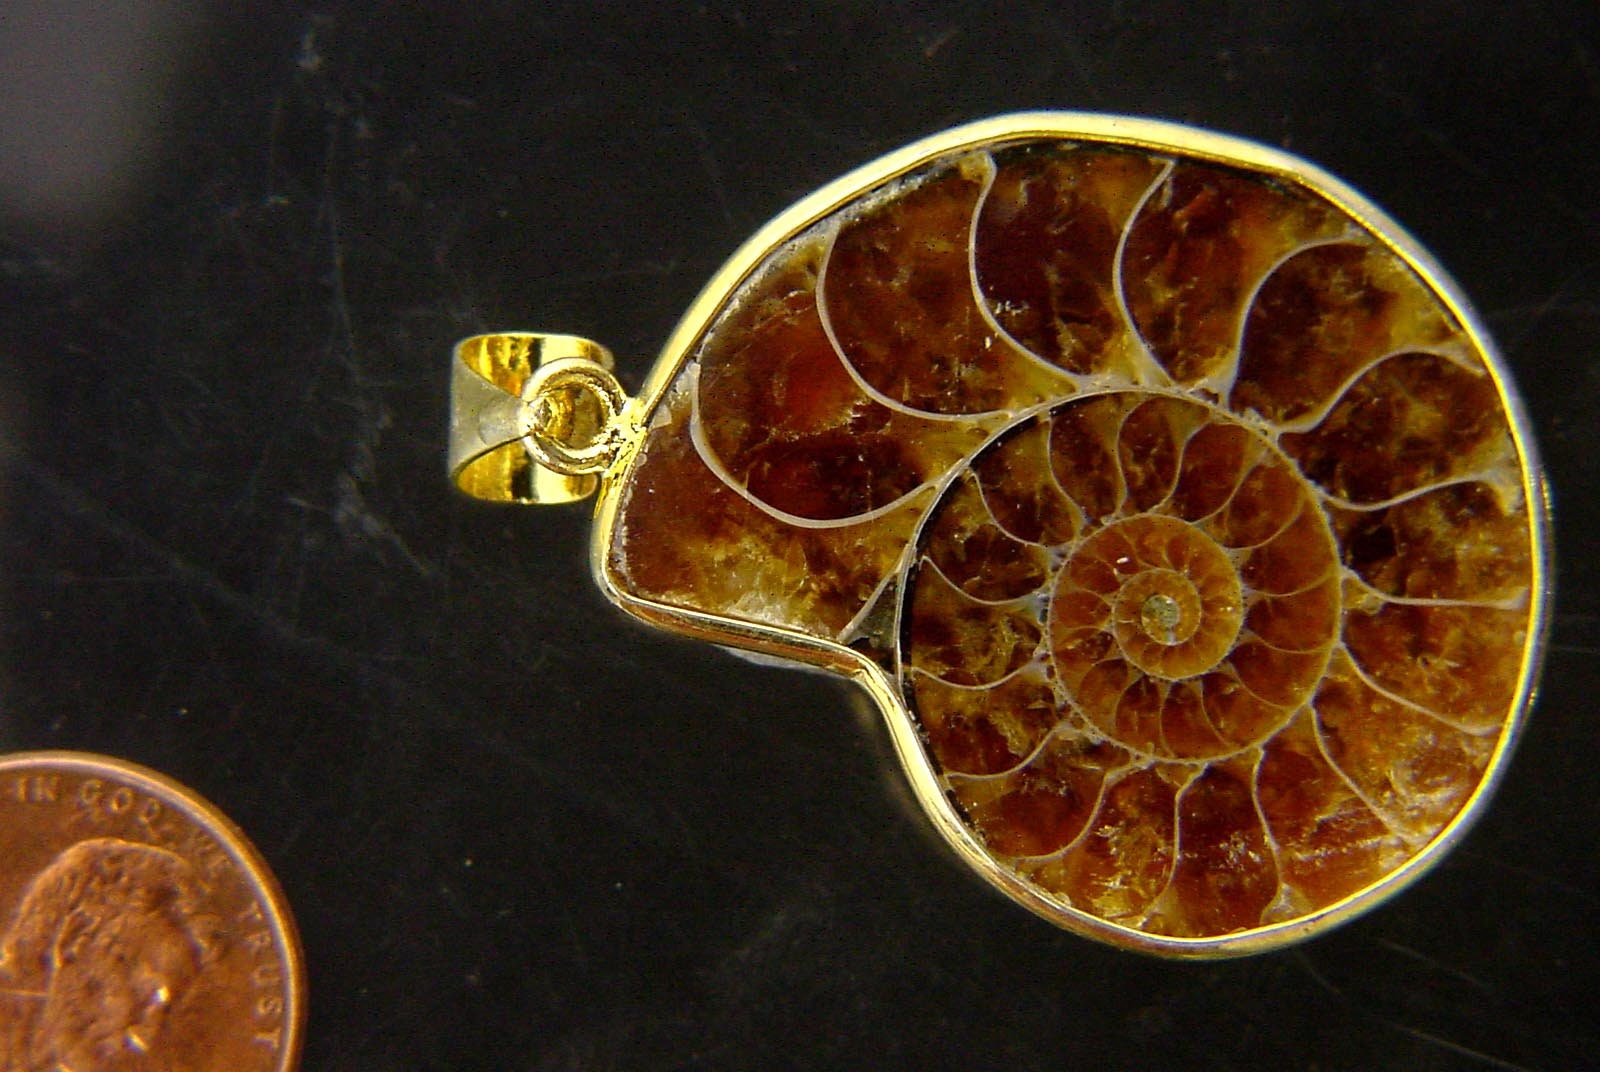 Gold Plated Ammonite Nautiloid Fossil Pendant Necklace Jewelry With 24 Gp Chain 7257P